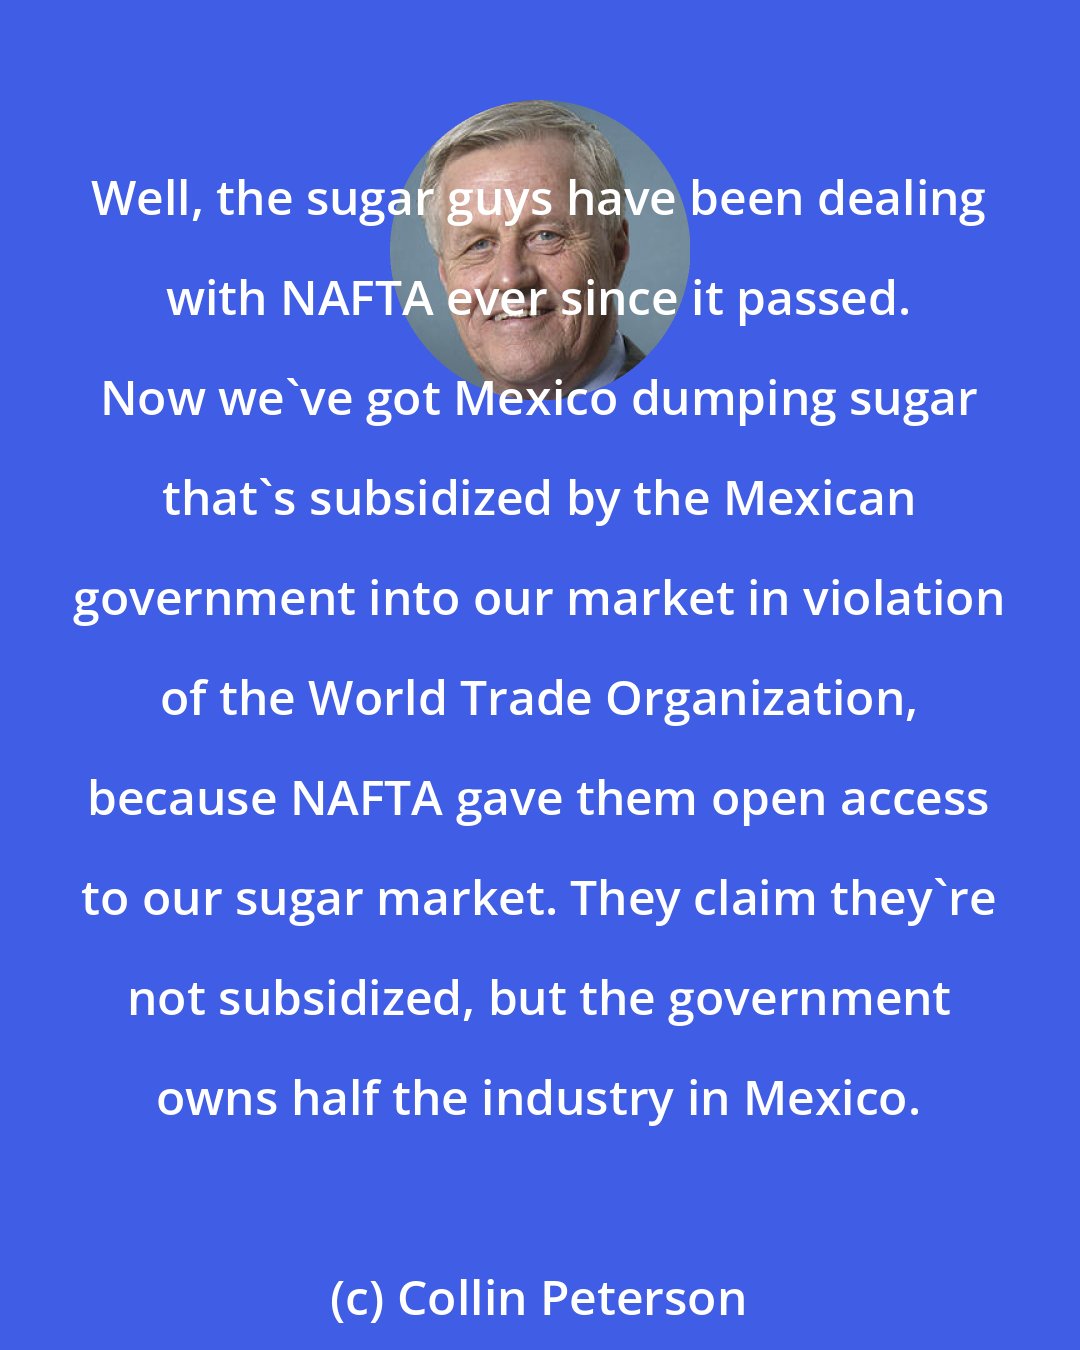 Collin Peterson: Well, the sugar guys have been dealing with NAFTA ever since it passed. Now we've got Mexico dumping sugar that's subsidized by the Mexican government into our market in violation of the World Trade Organization, because NAFTA gave them open access to our sugar market. They claim they're not subsidized, but the government owns half the industry in Mexico.